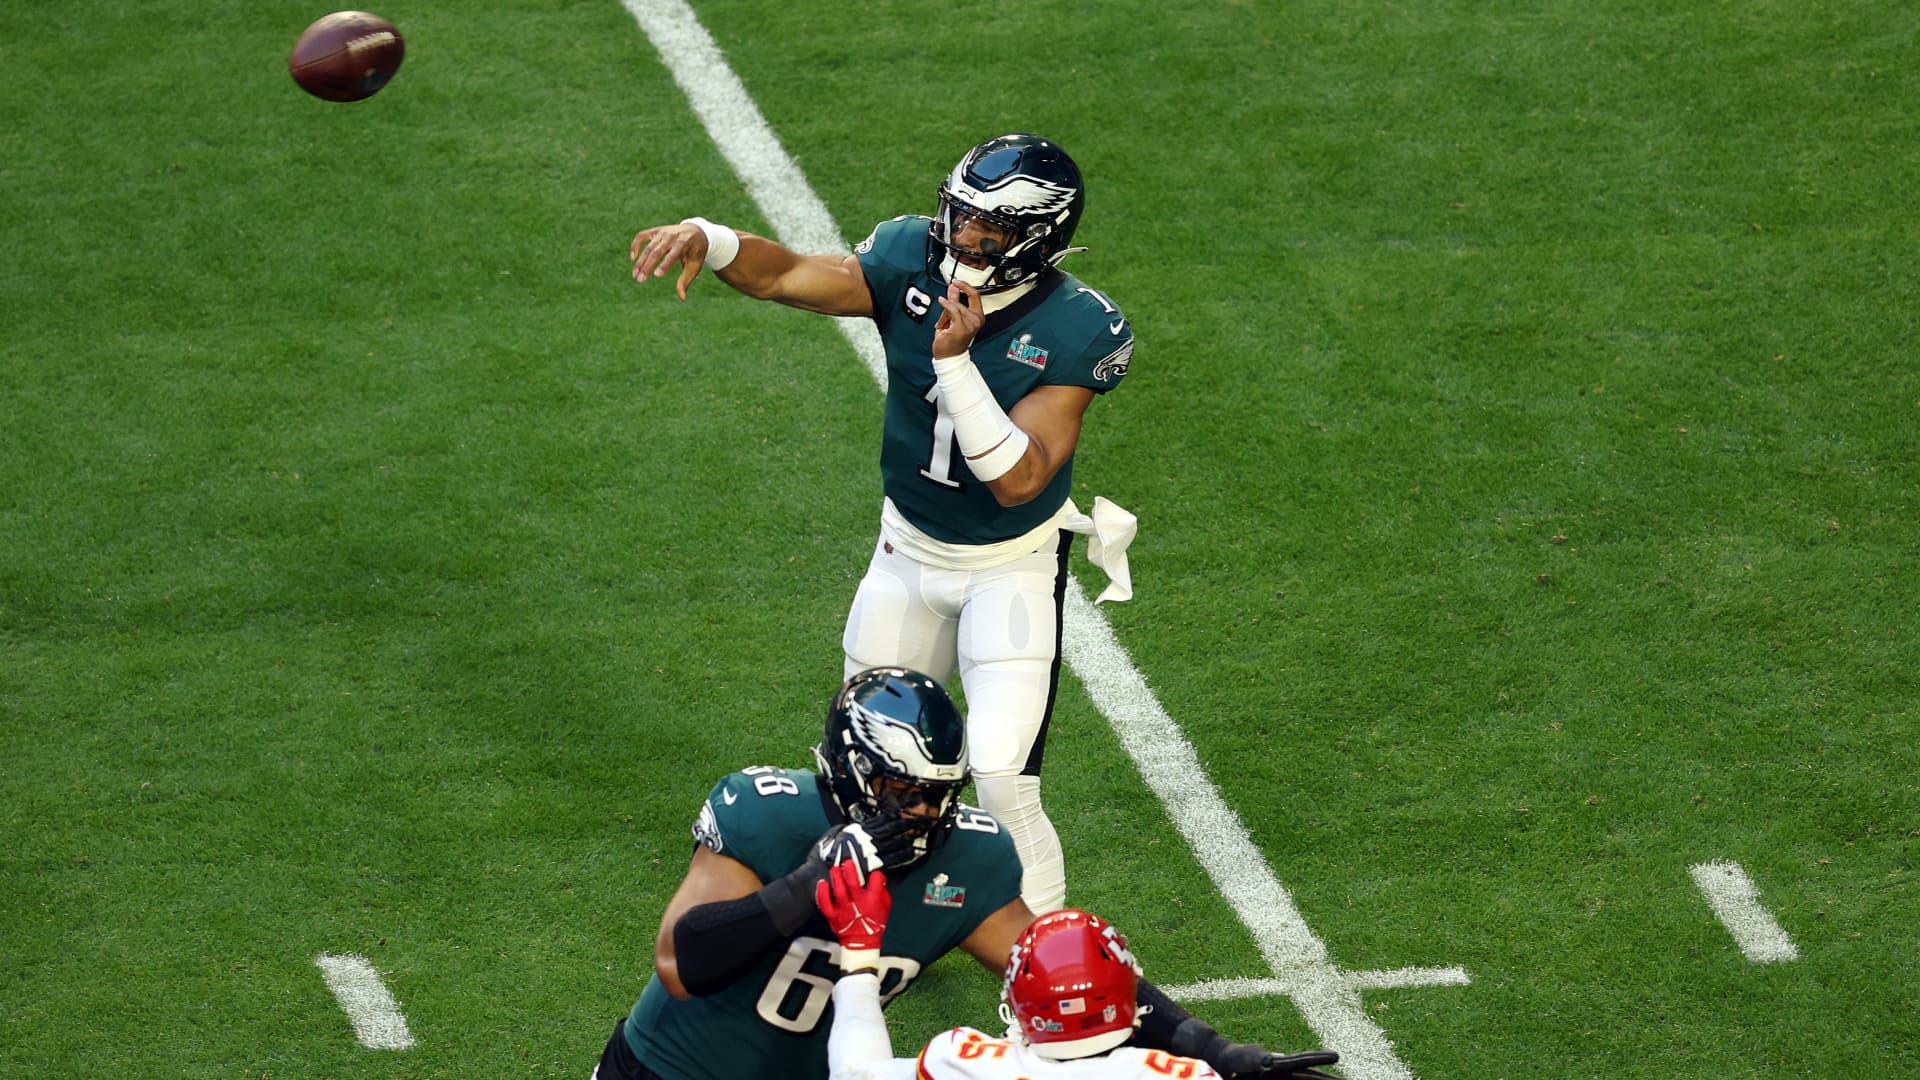 Jalen Hurts #1 of the Philadelphia Eagles throws a pass during the first quarter against the Kansas City Chiefs in Super Bowl LVII at State Farm Stadium on February 12, 2023 in Glendale, Arizona.